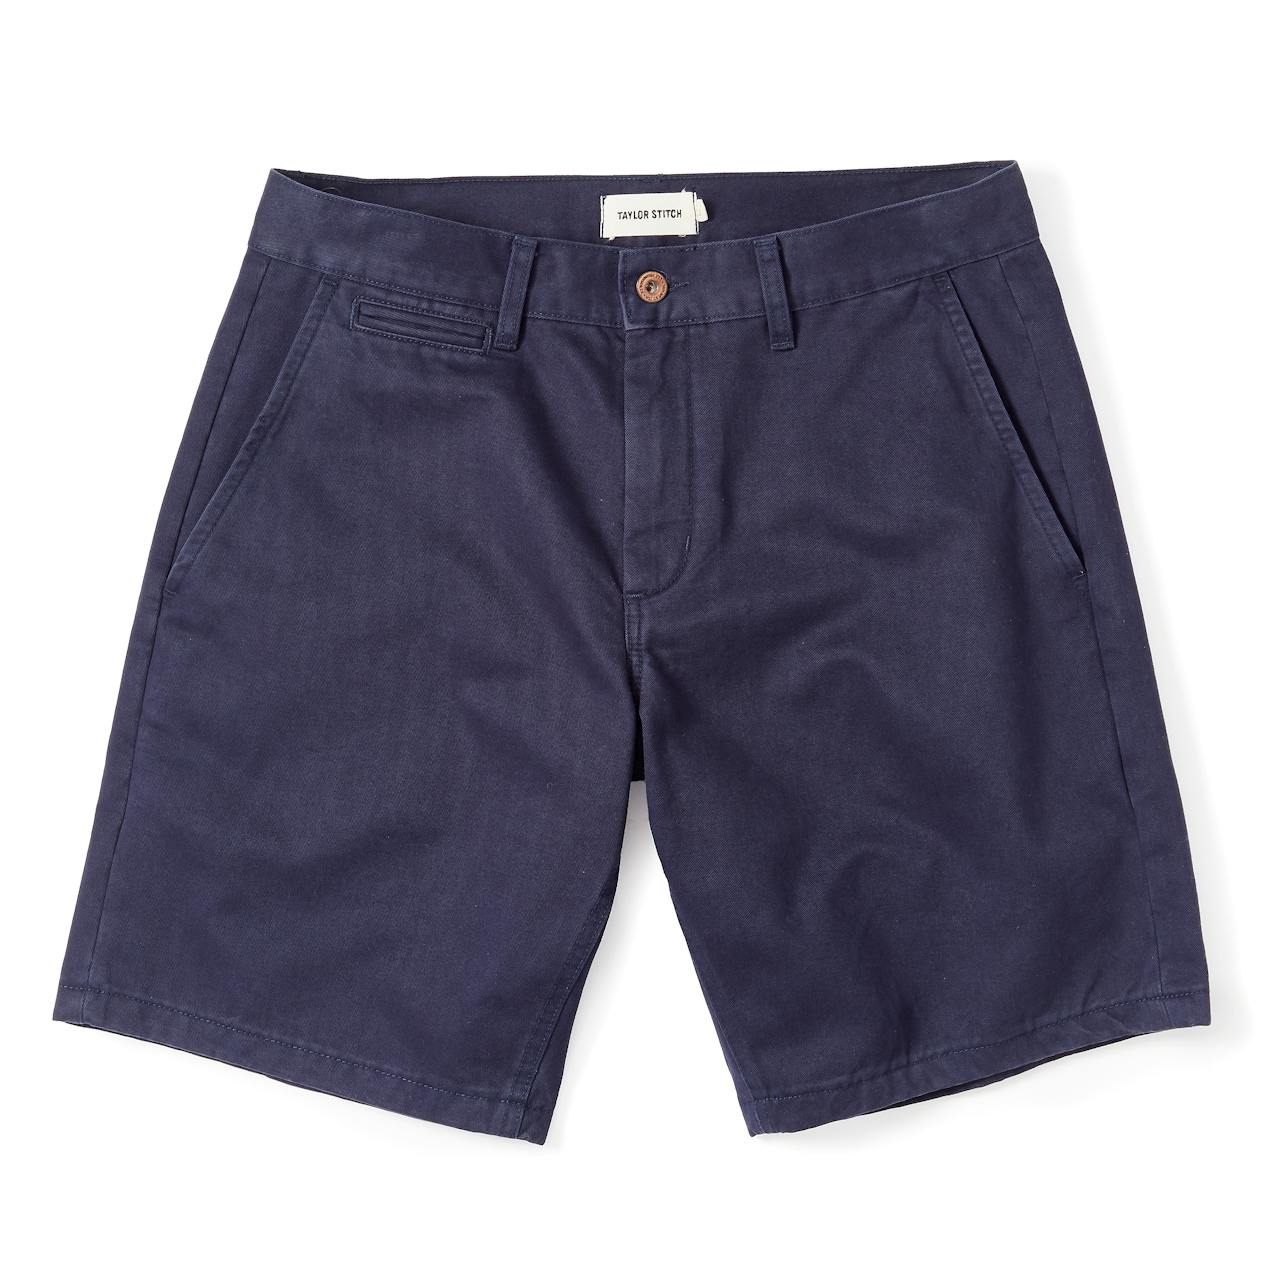 Taylor Stitch The Traveler Short - Exclusive